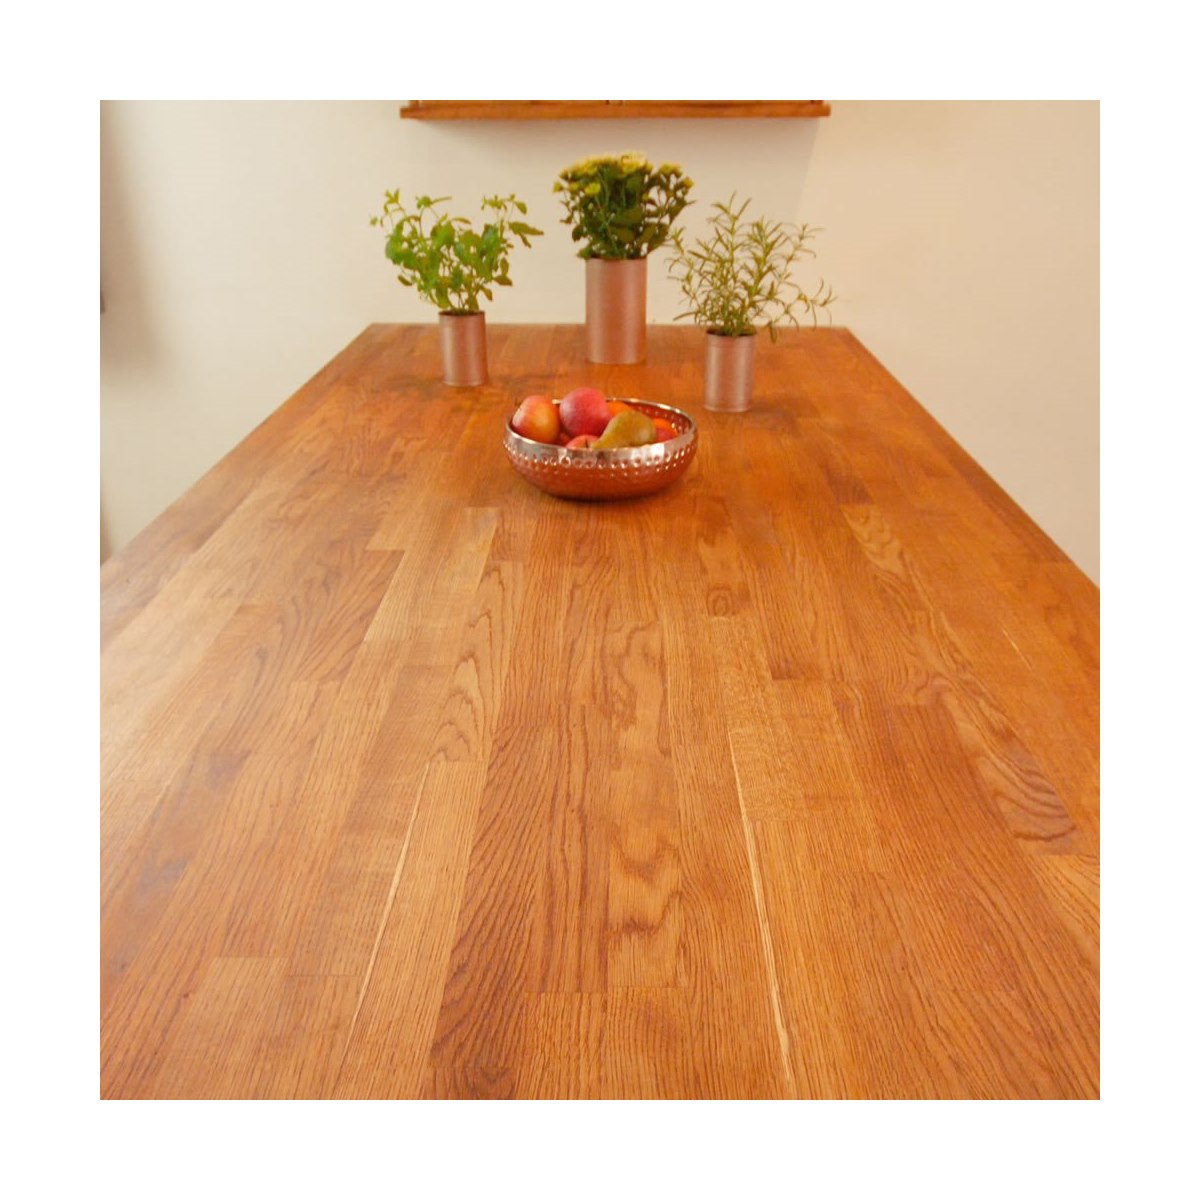 Danish OIl for Wooden Surfaces